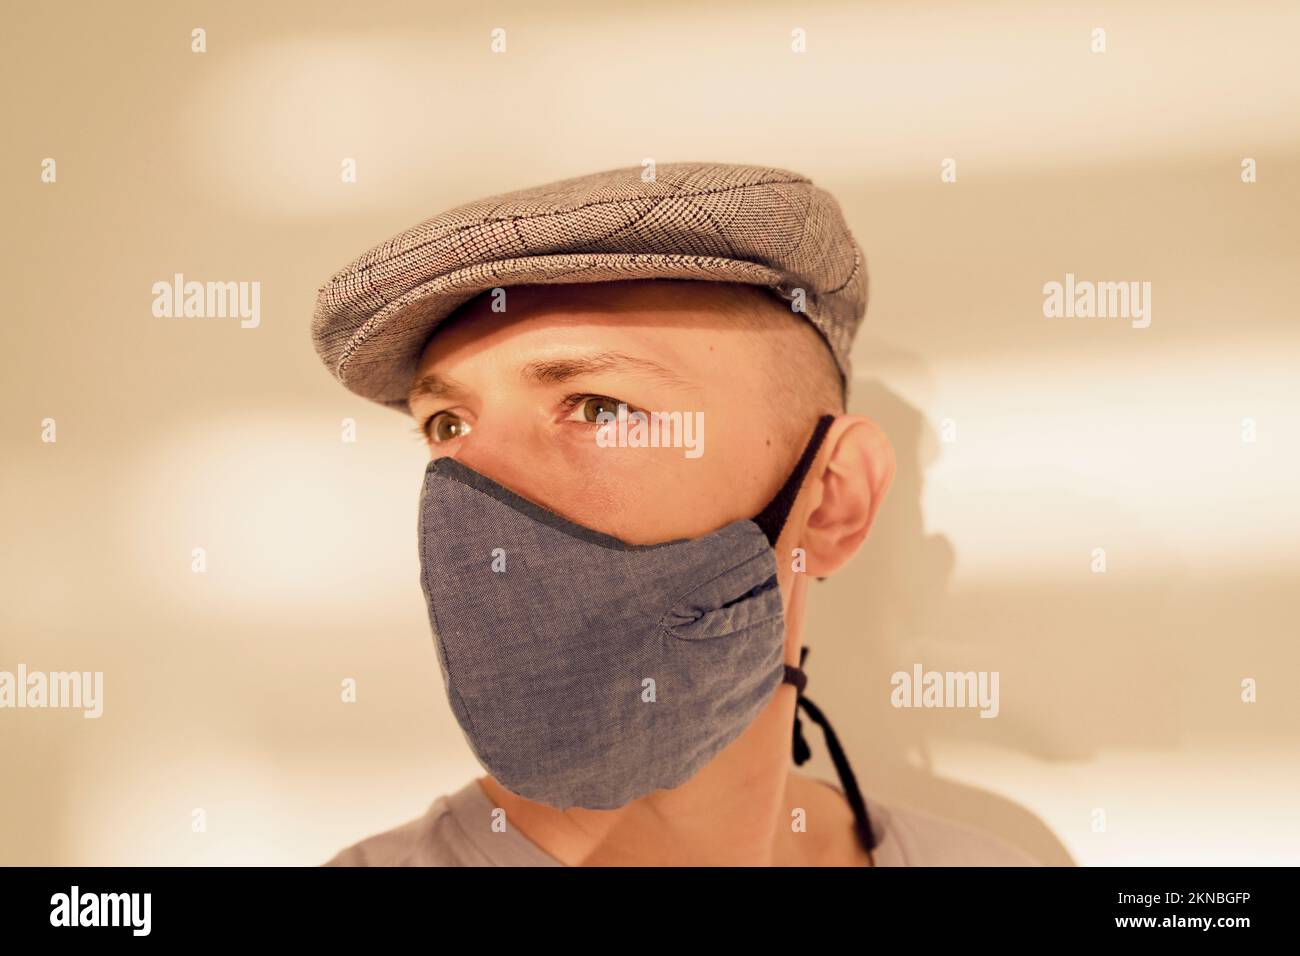 Portrait of a Man Wearing Protective Face Mask. Bozen, Italy Stock Photo